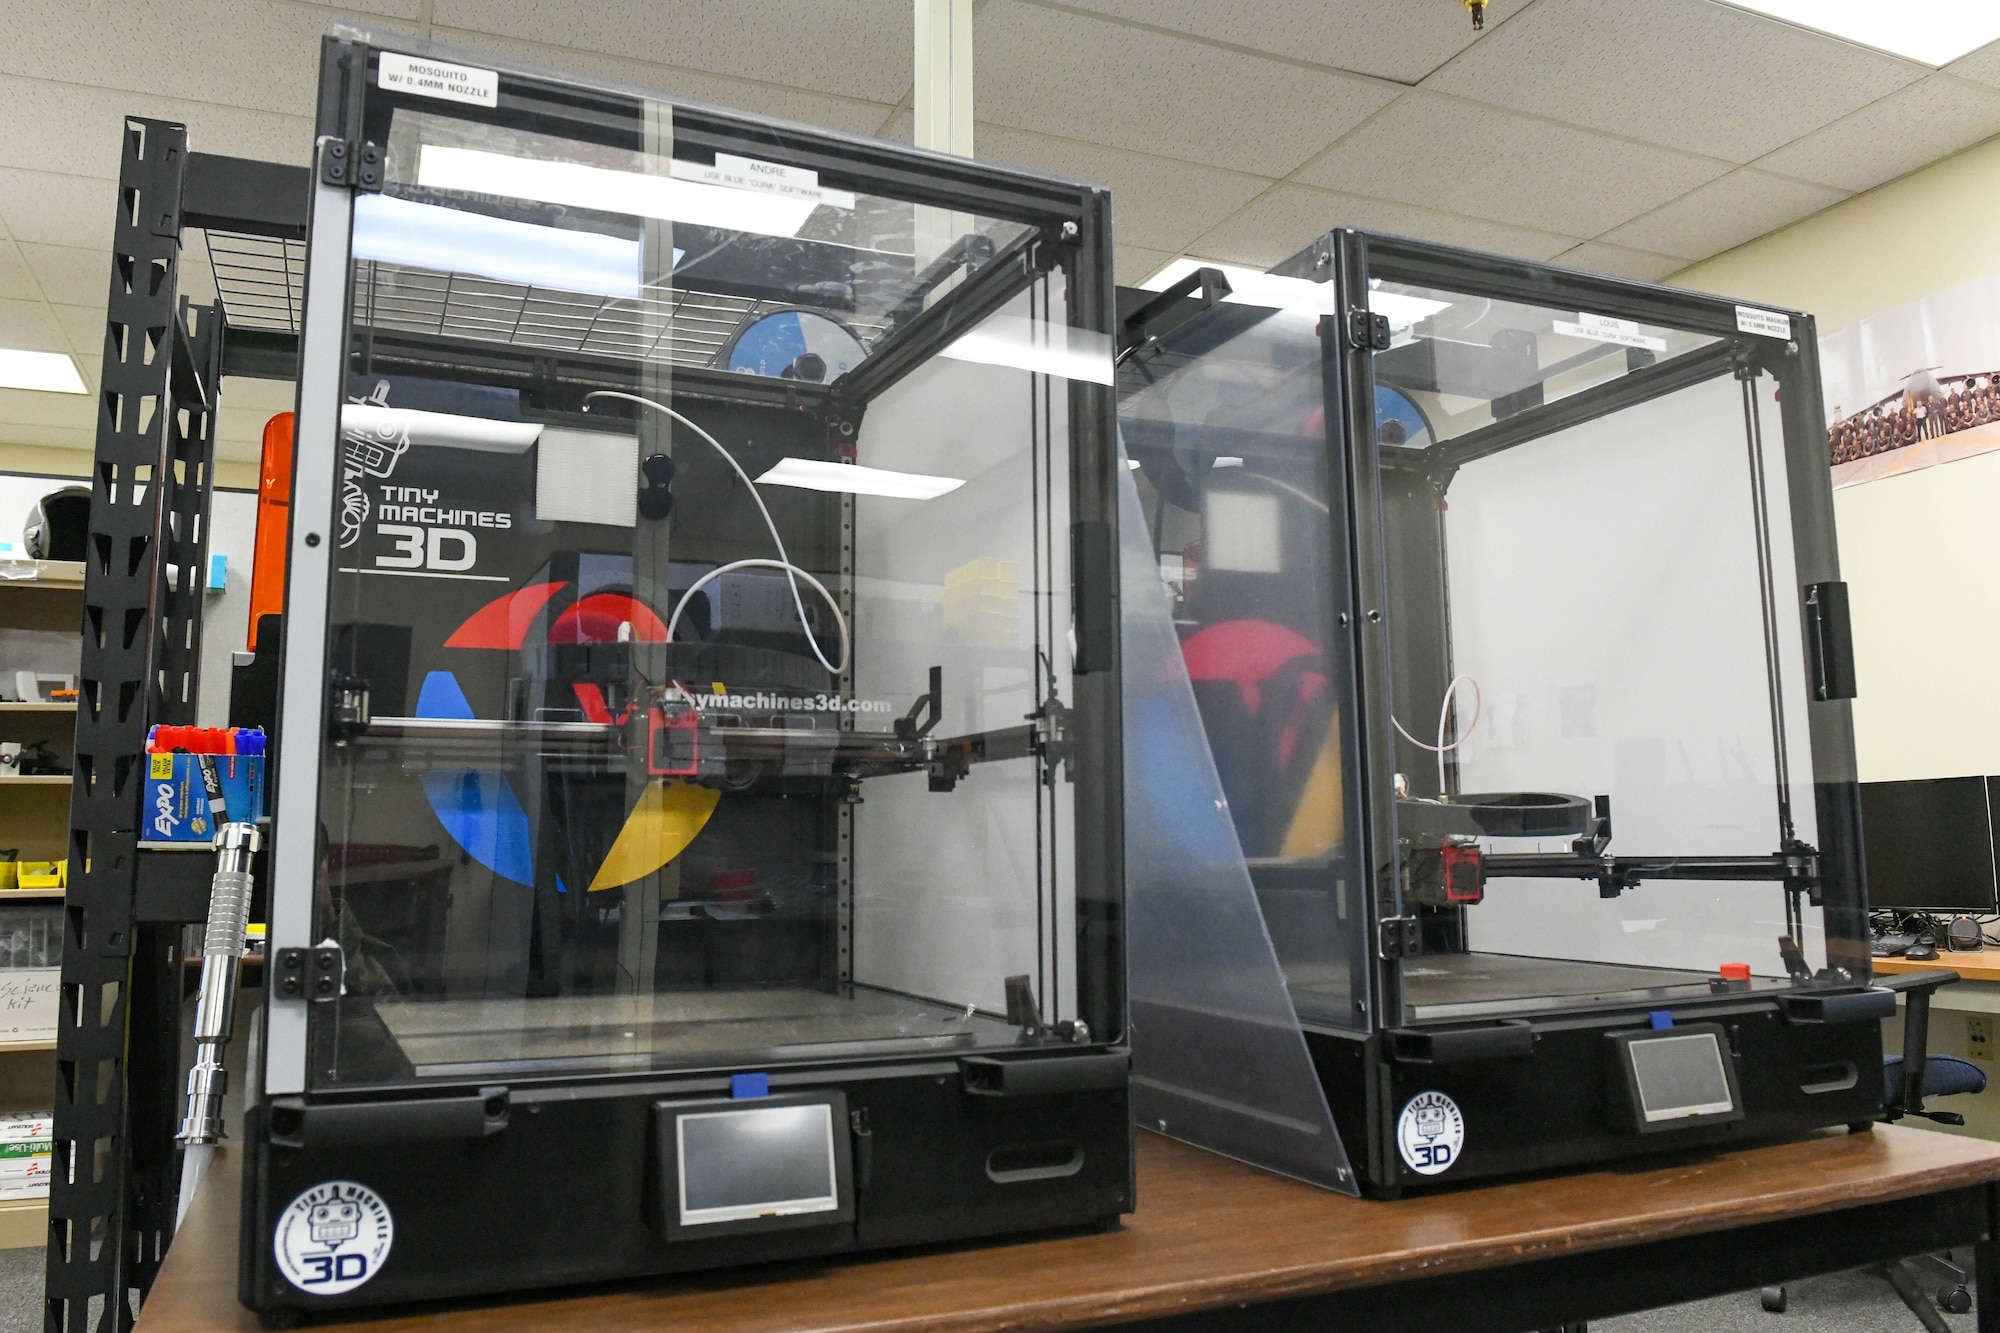 3D printers sit in the Spark Cell office for Airmen to use at Altus Air Force Base, Oklahoma, March 3, 2022. The 97th Air Mobility Wing’s Spark Cell program strives to foster a culture of creativity and problem solving. (U.S. Air Force photo by Airman 1st Class Trenton Jancze)